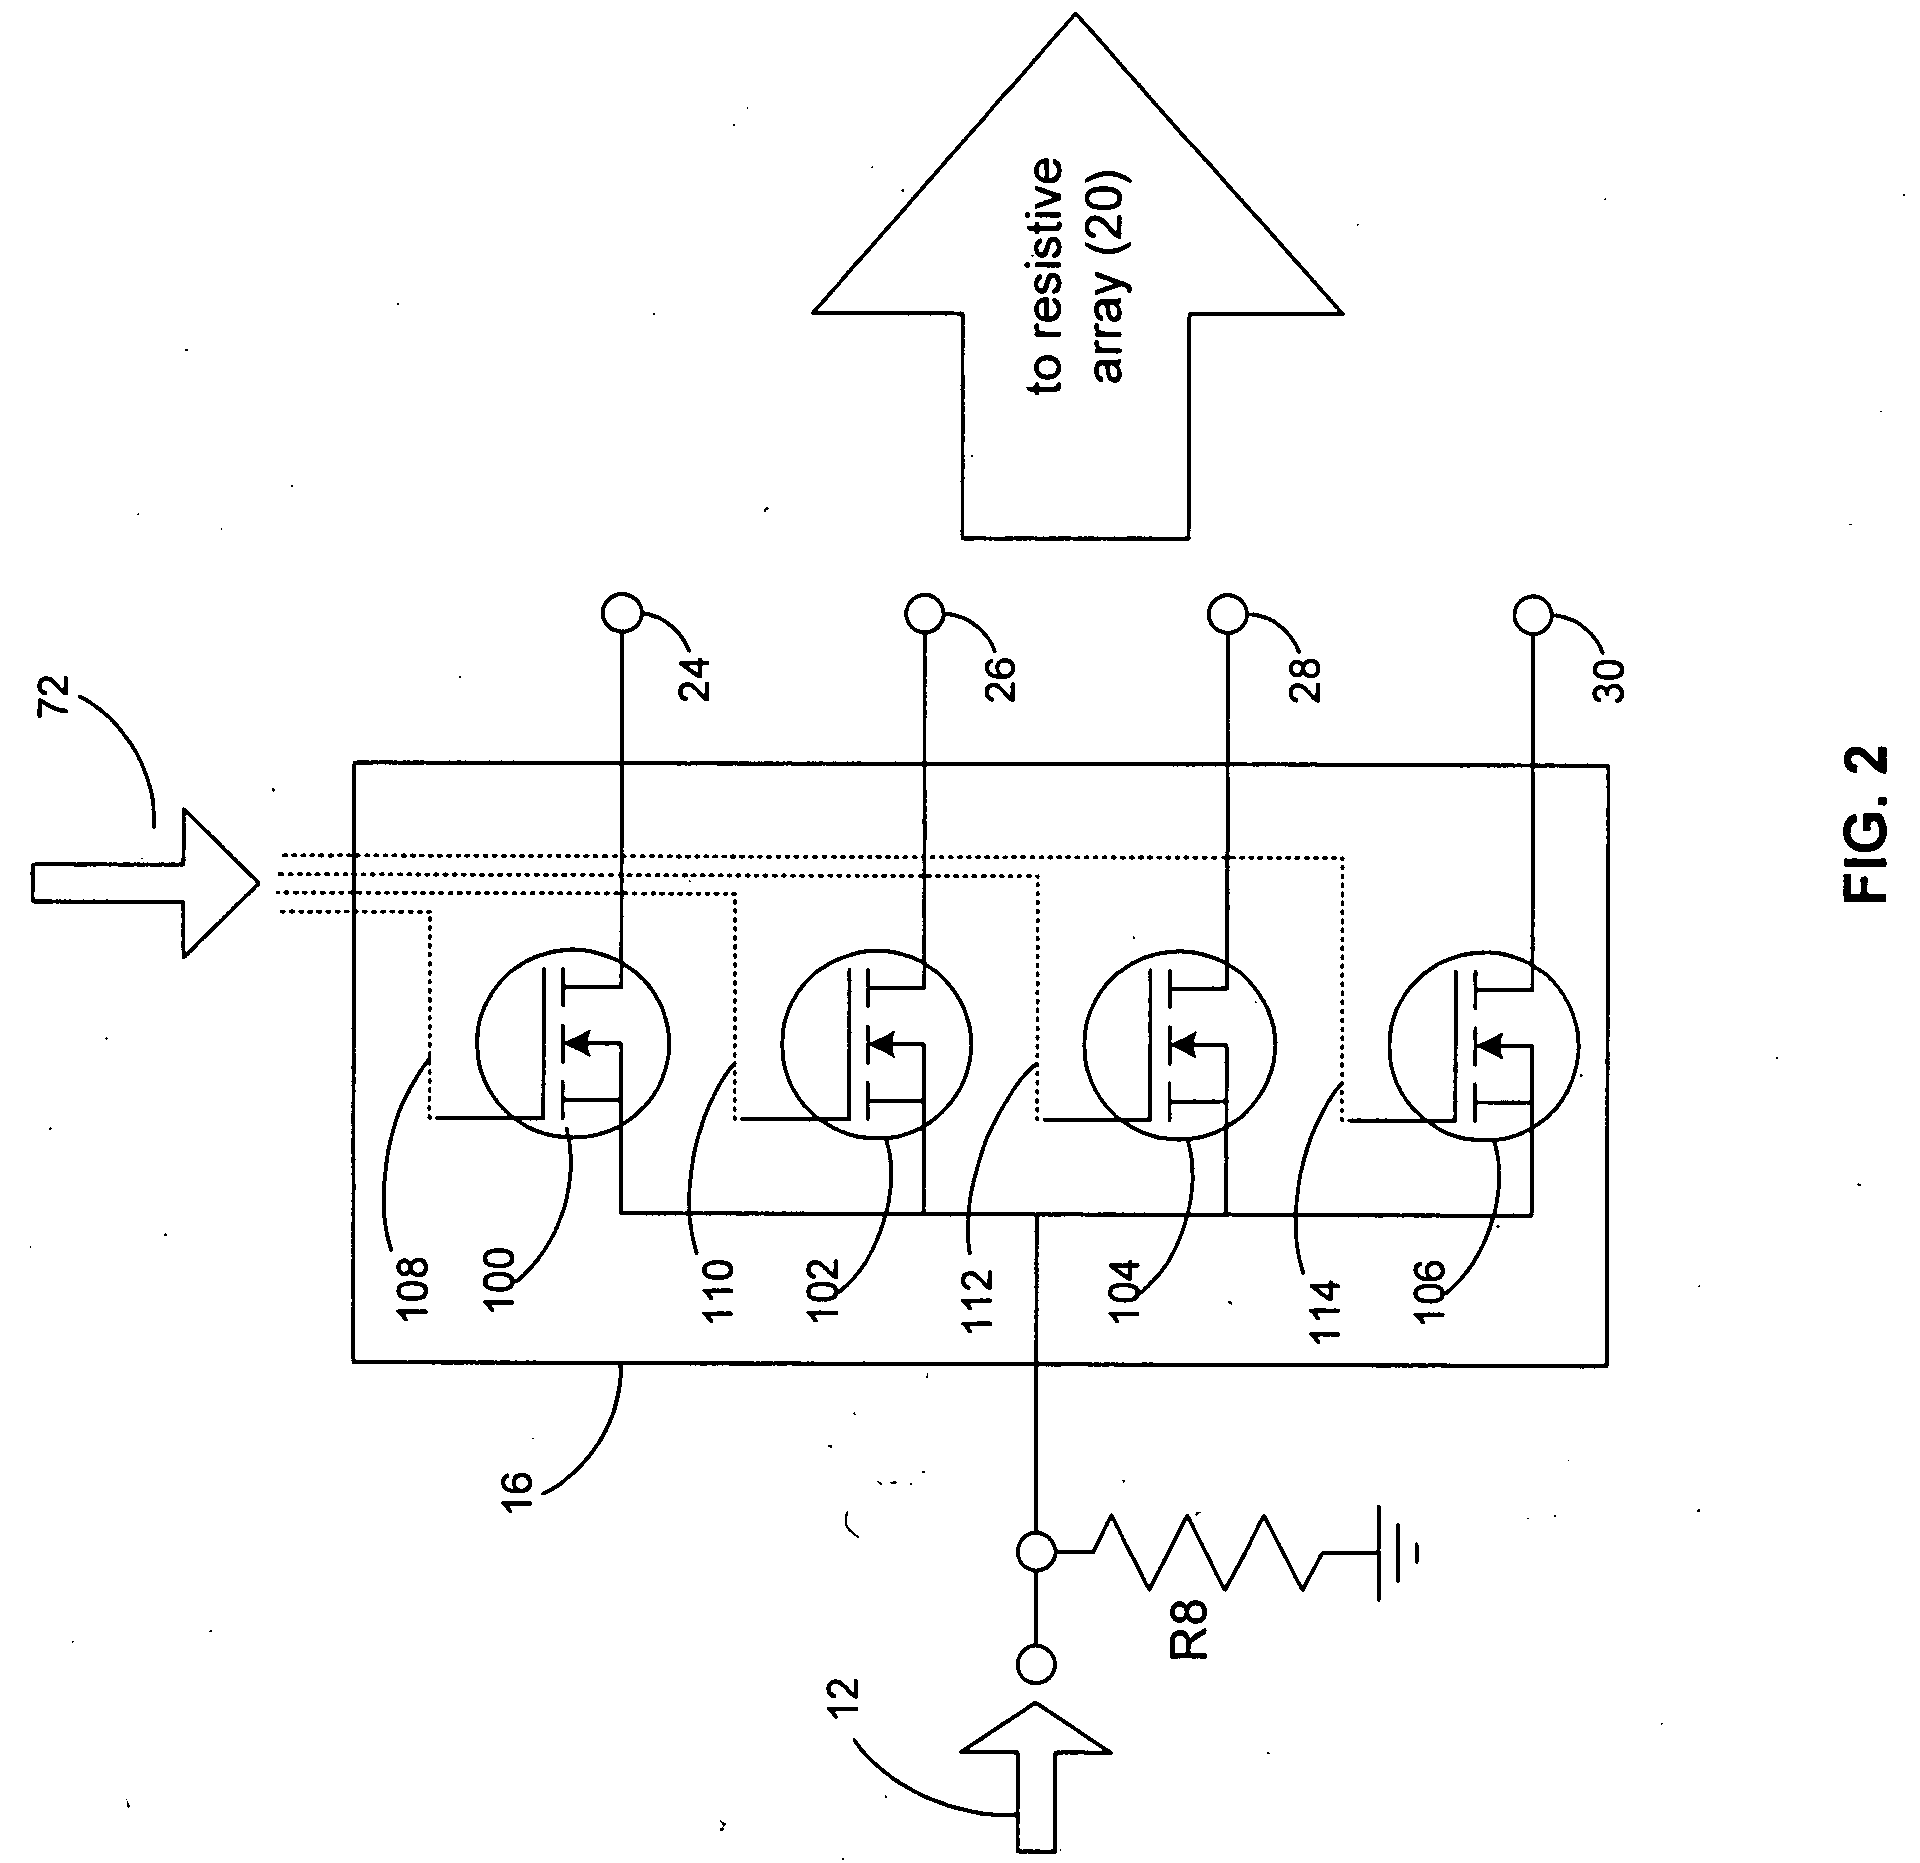 High-resolution variable attenuation device